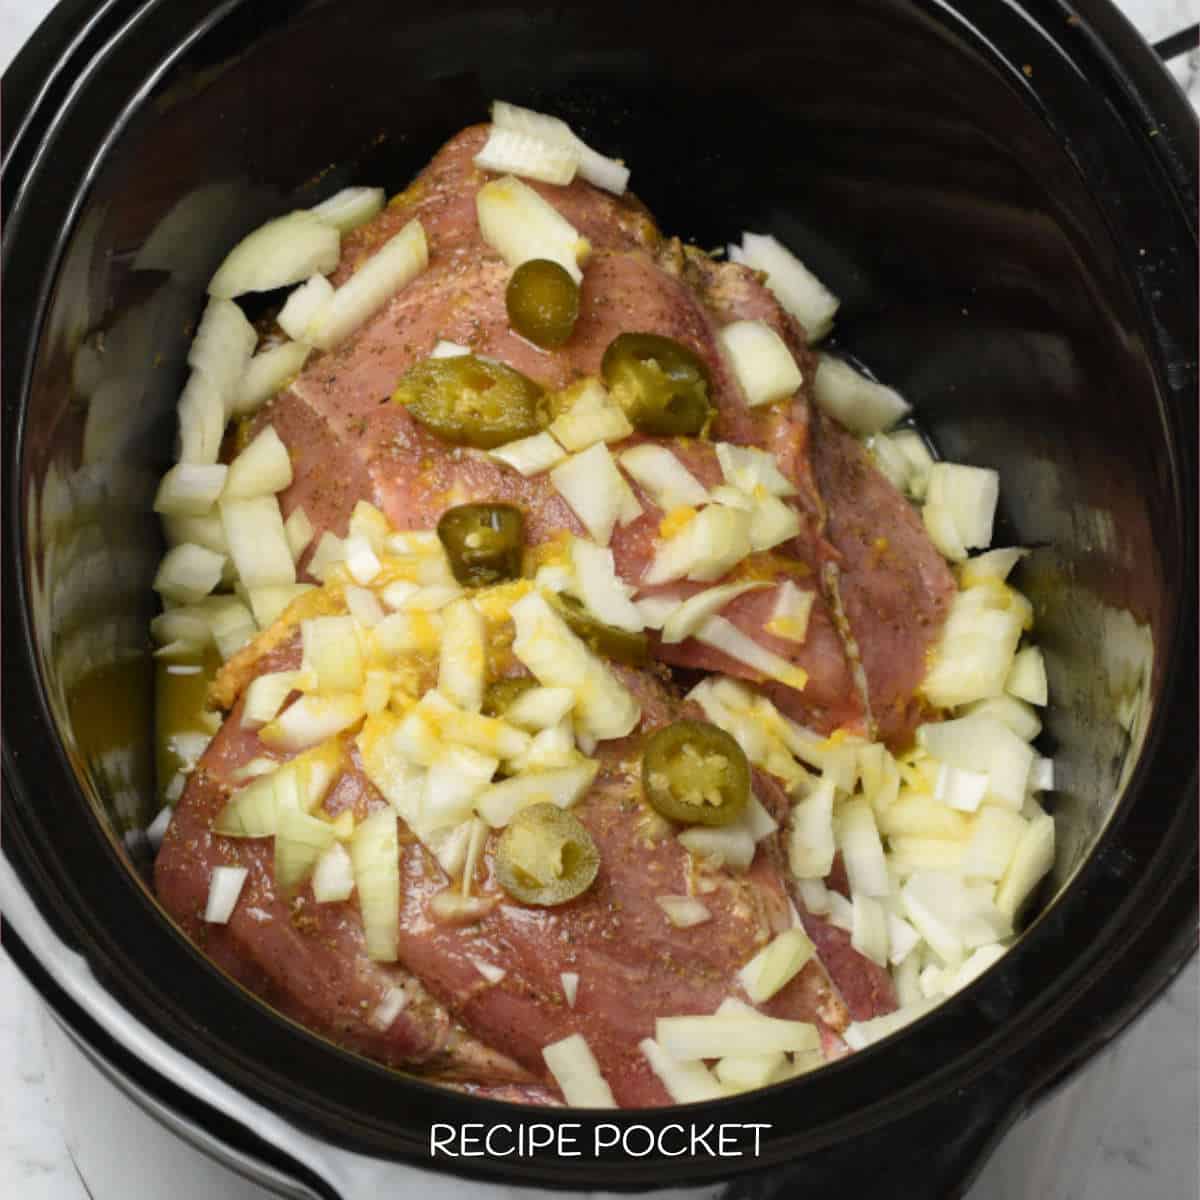 Pork shoulder in a slow cooker with onions and jalapenos.